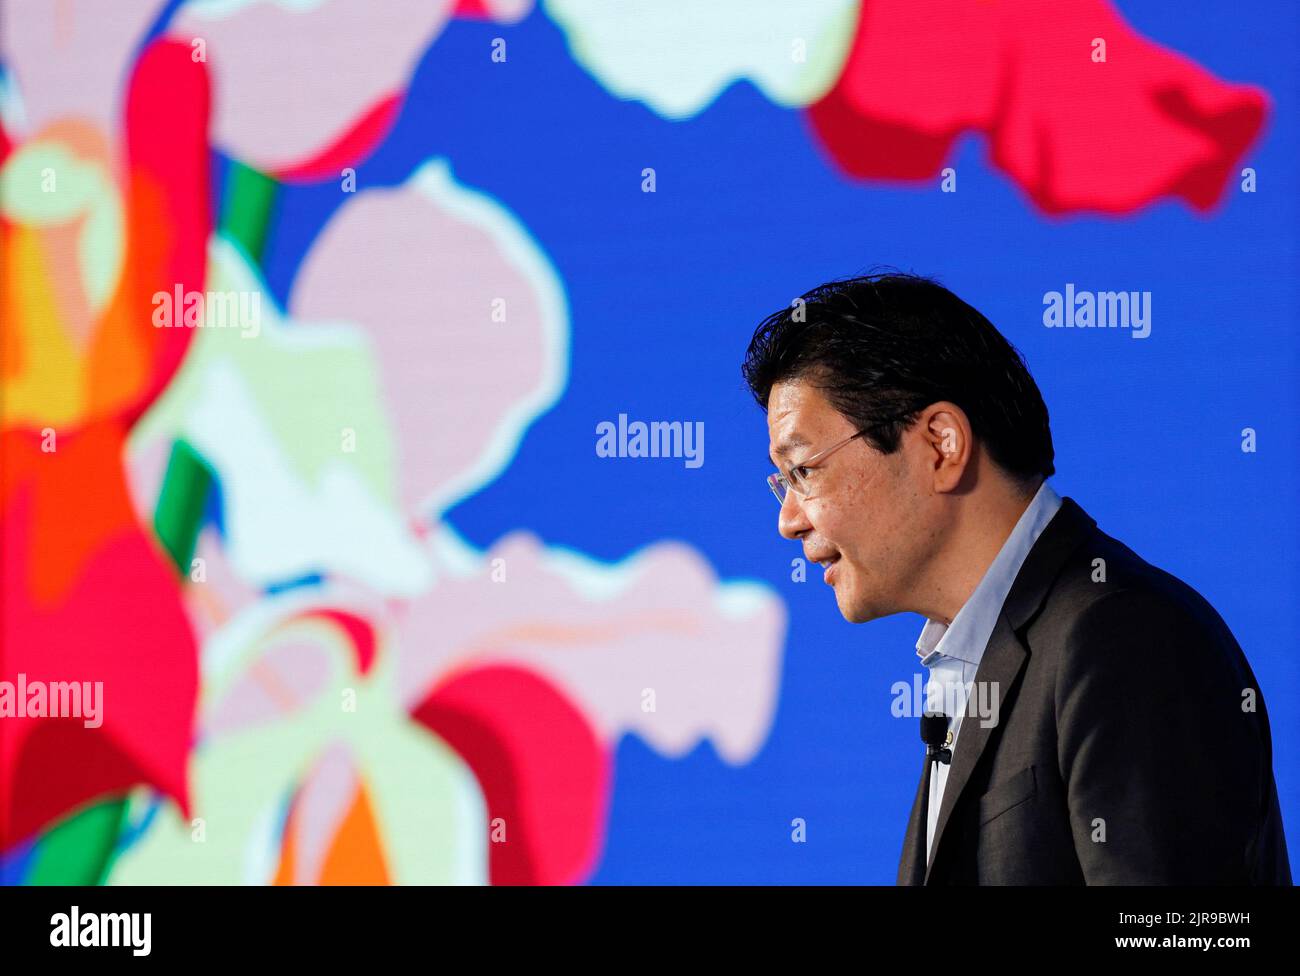 Singapore's Deputy Prime Minister and Minister for Finance Lawrence Wong attend 'Google for Singapore', an event celebrating the company's 15th year in the country, at Google's office, in Singapore August 23, 2022. REUTERS/Edgar Su Stock Photo